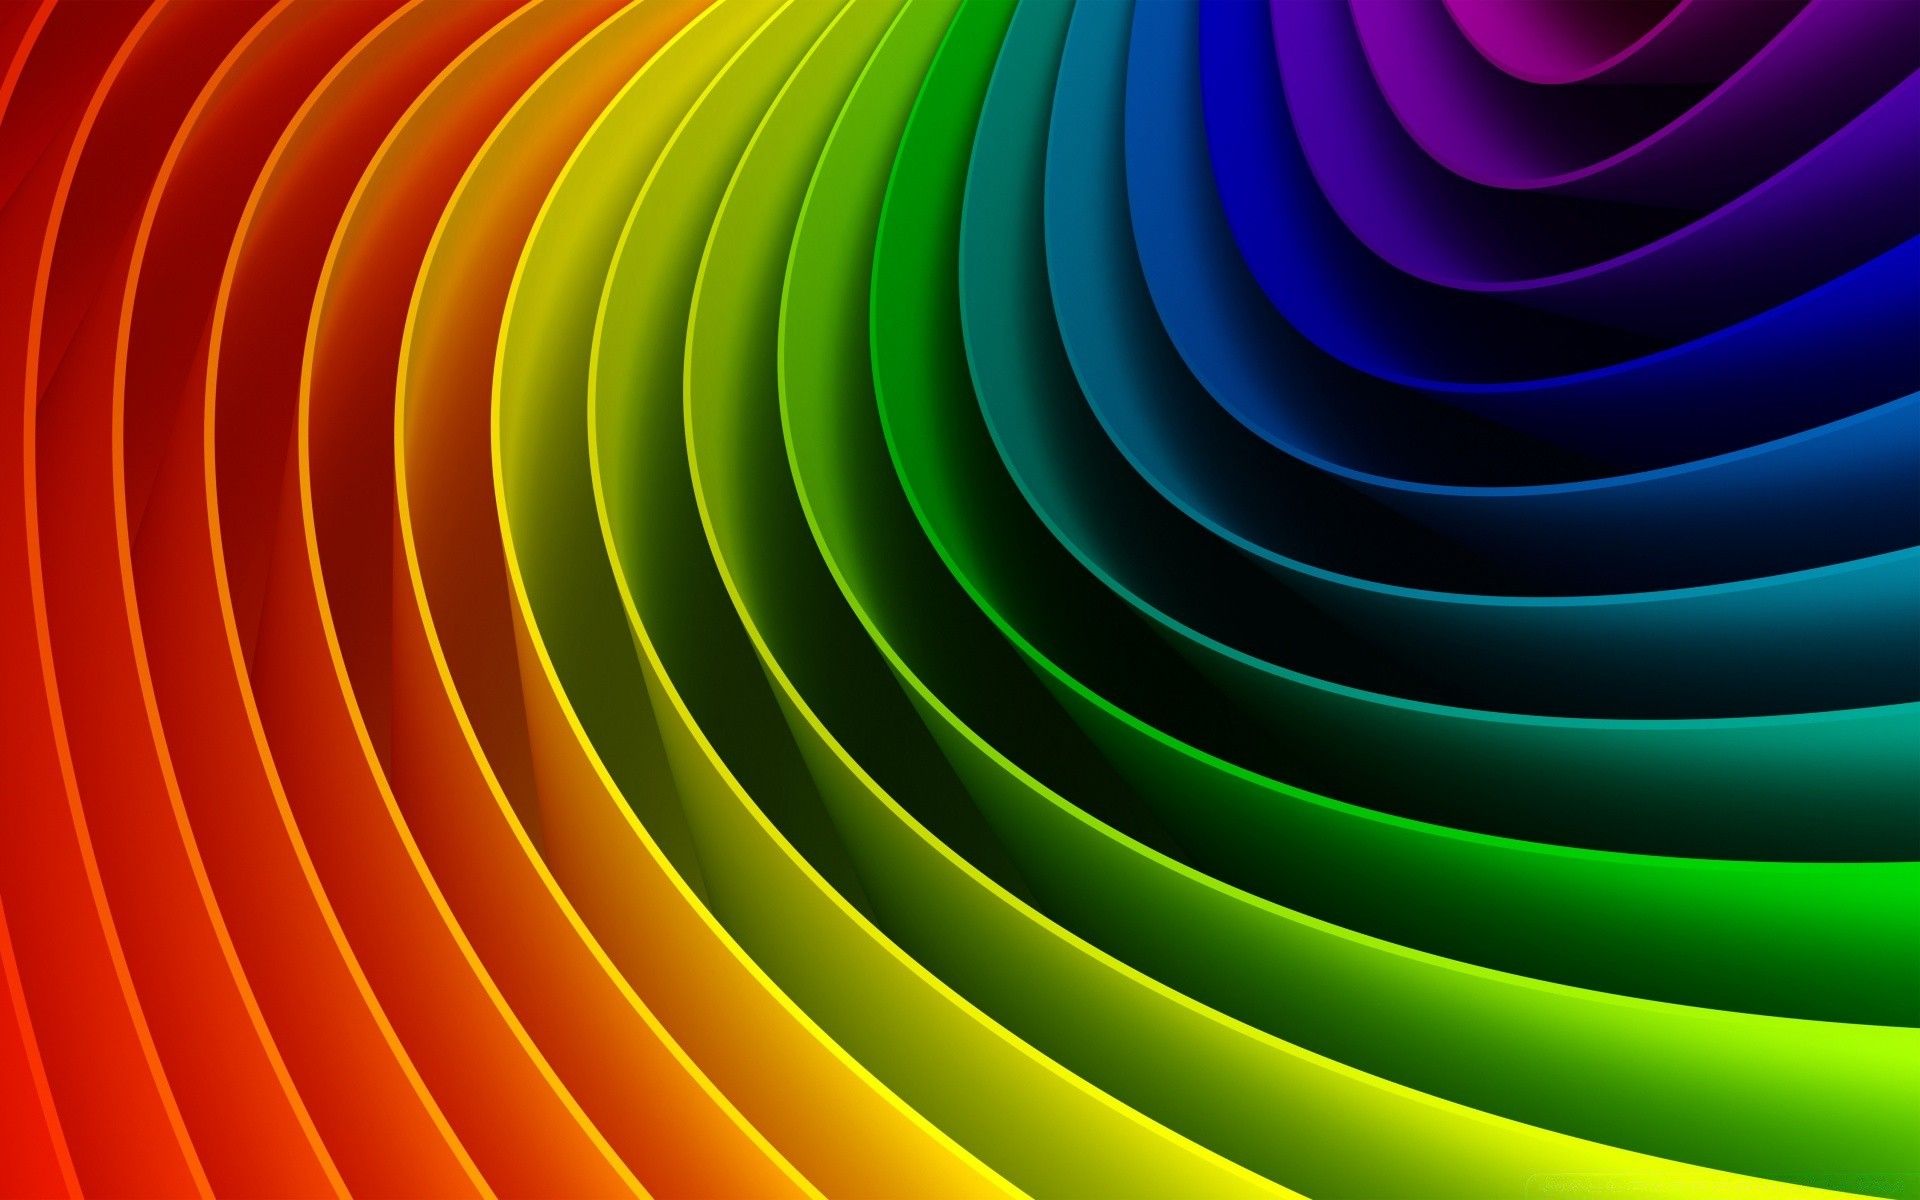 Rainbow Geometric Shapes Wallpapers Wallpaper Cave